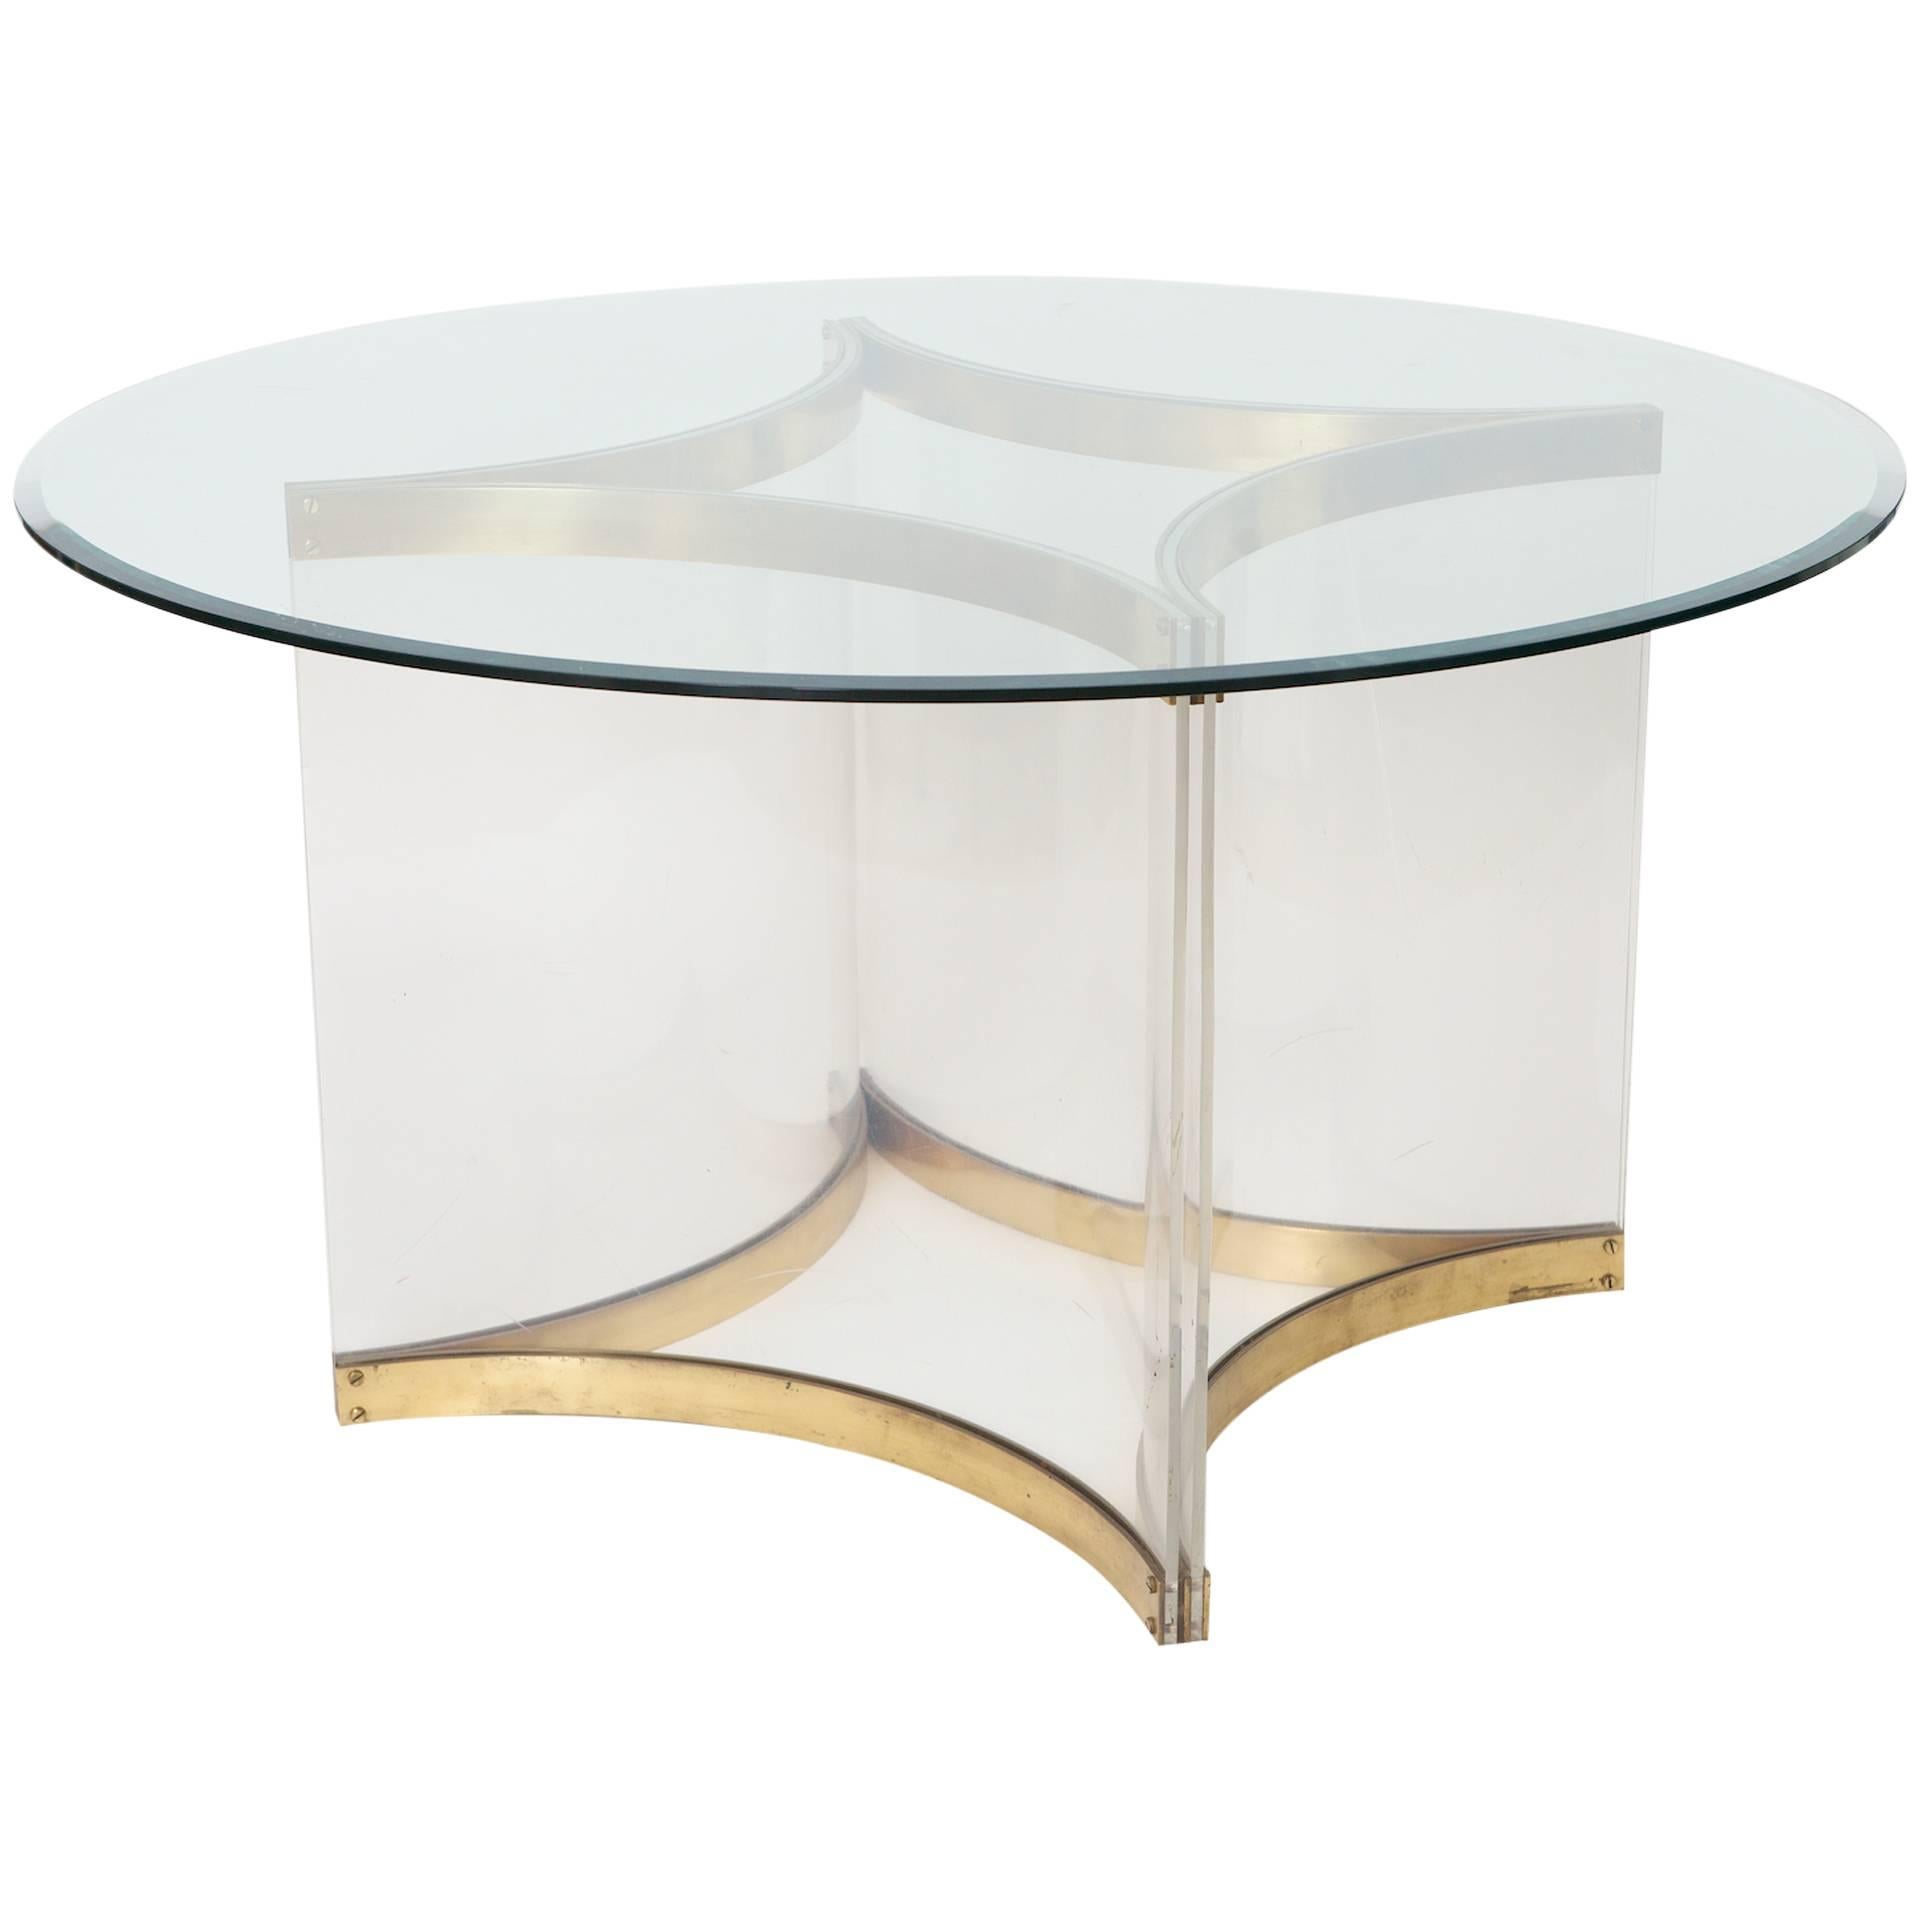 Alessandro Albrizzi Dining Table, glass, lucite and brass c1960